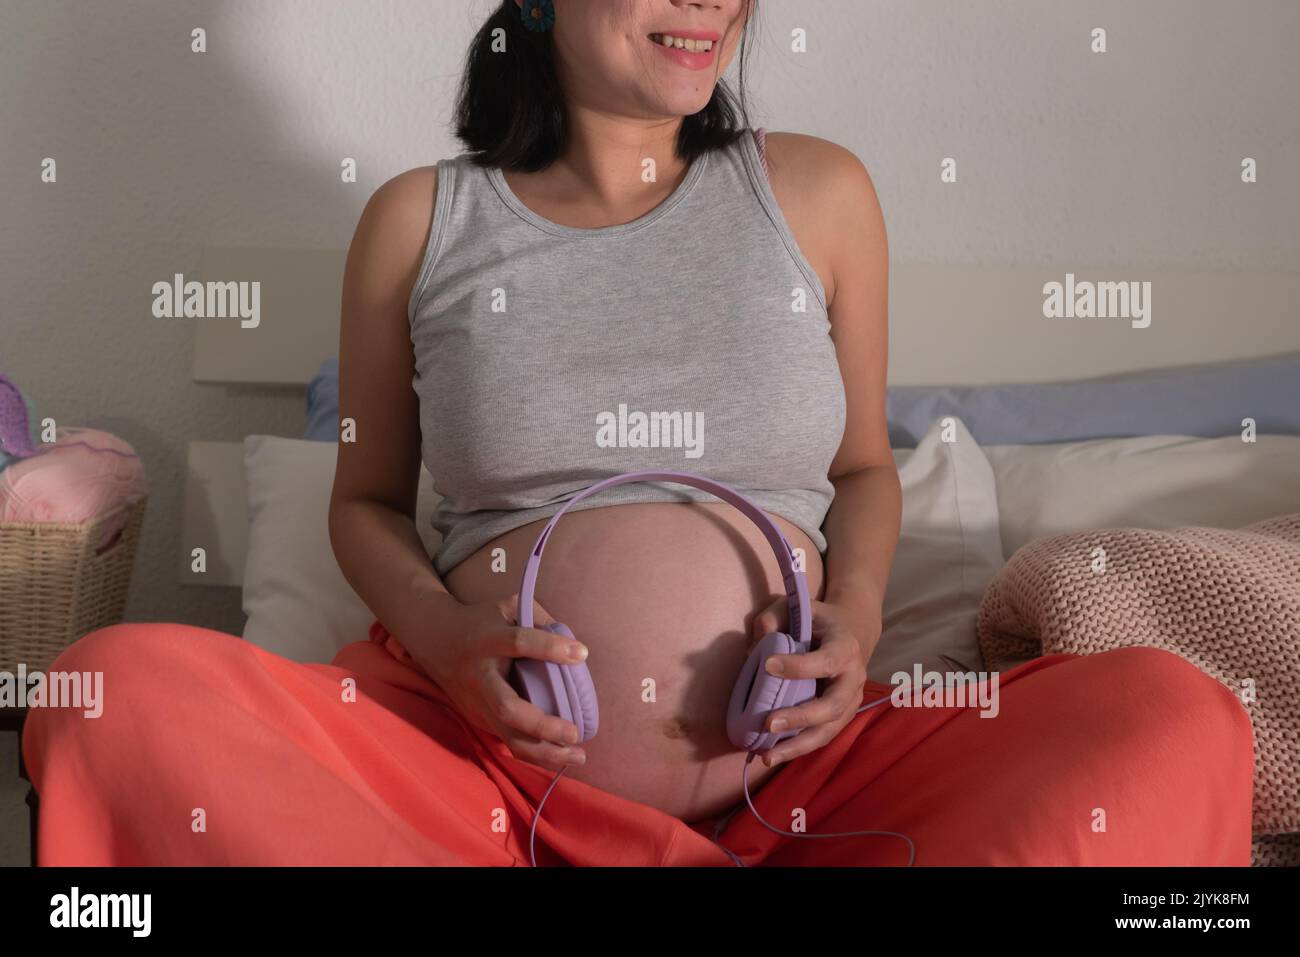 pregnancy home portrait of young happy and beautiful woman sitting pregnant on bed sharing music with her upcoming new baby putting headphones on her Stock Photo